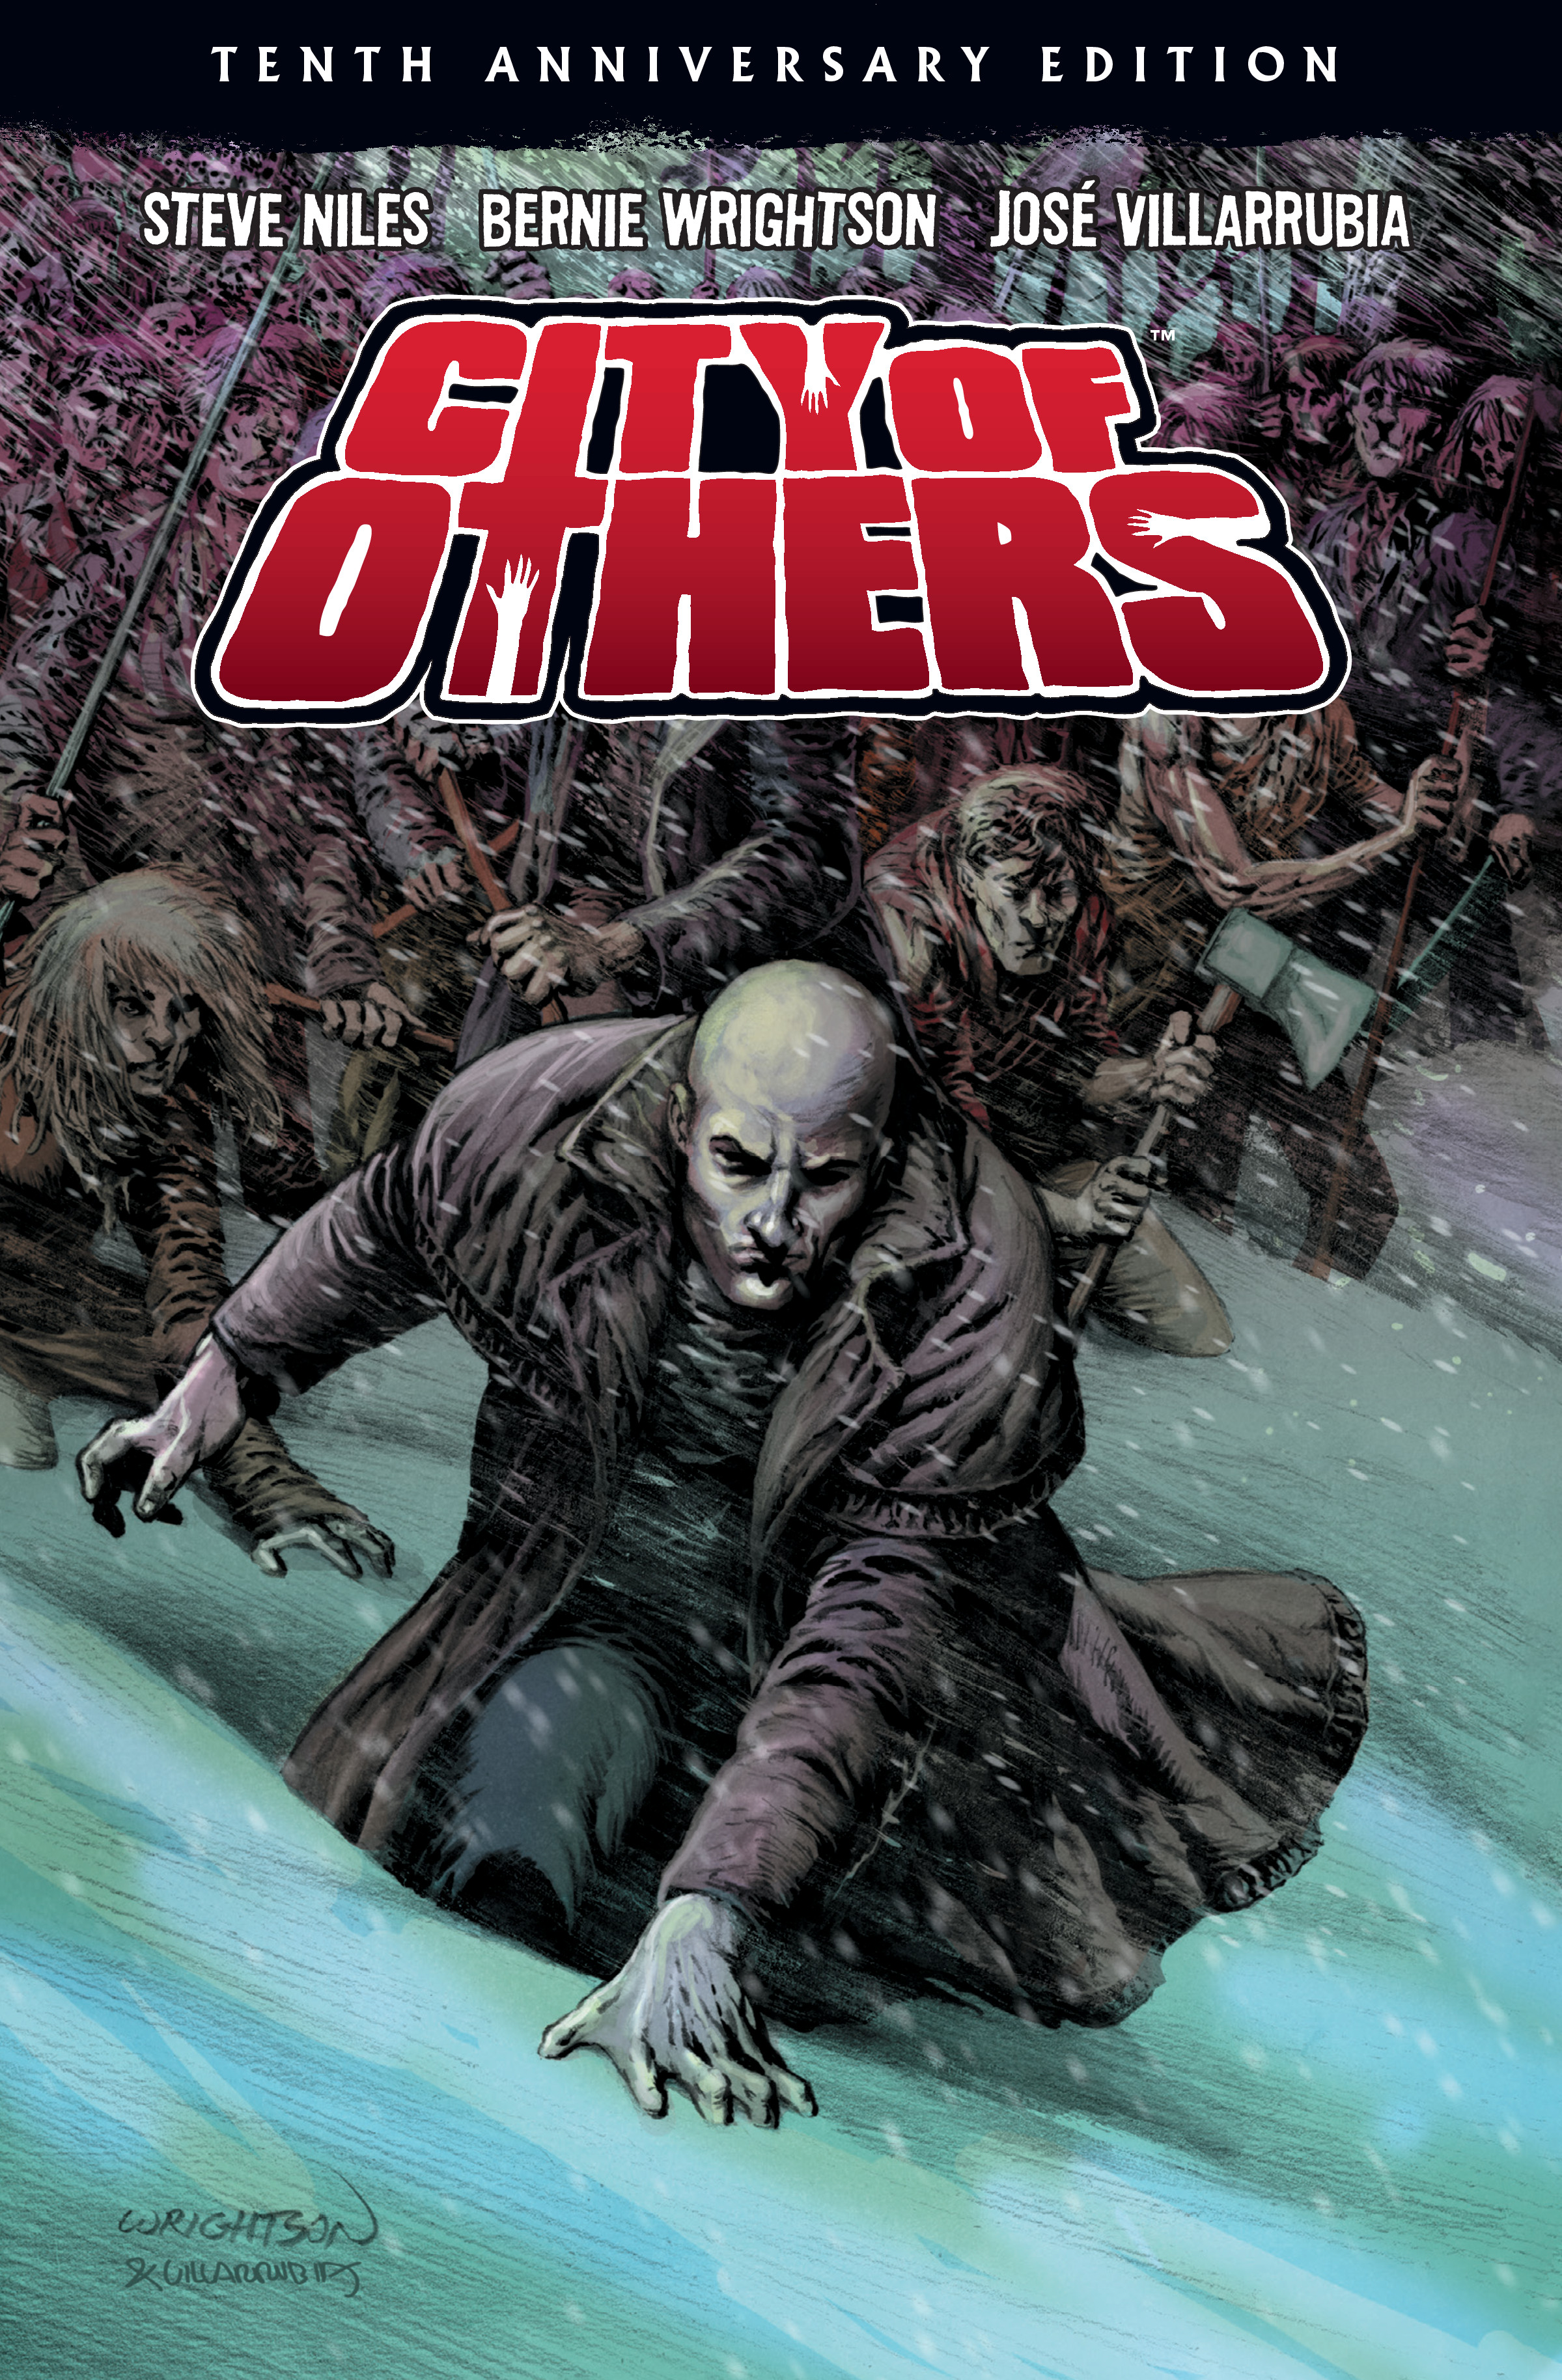 Read online City of Others comic -  Issue # _TPB - 1